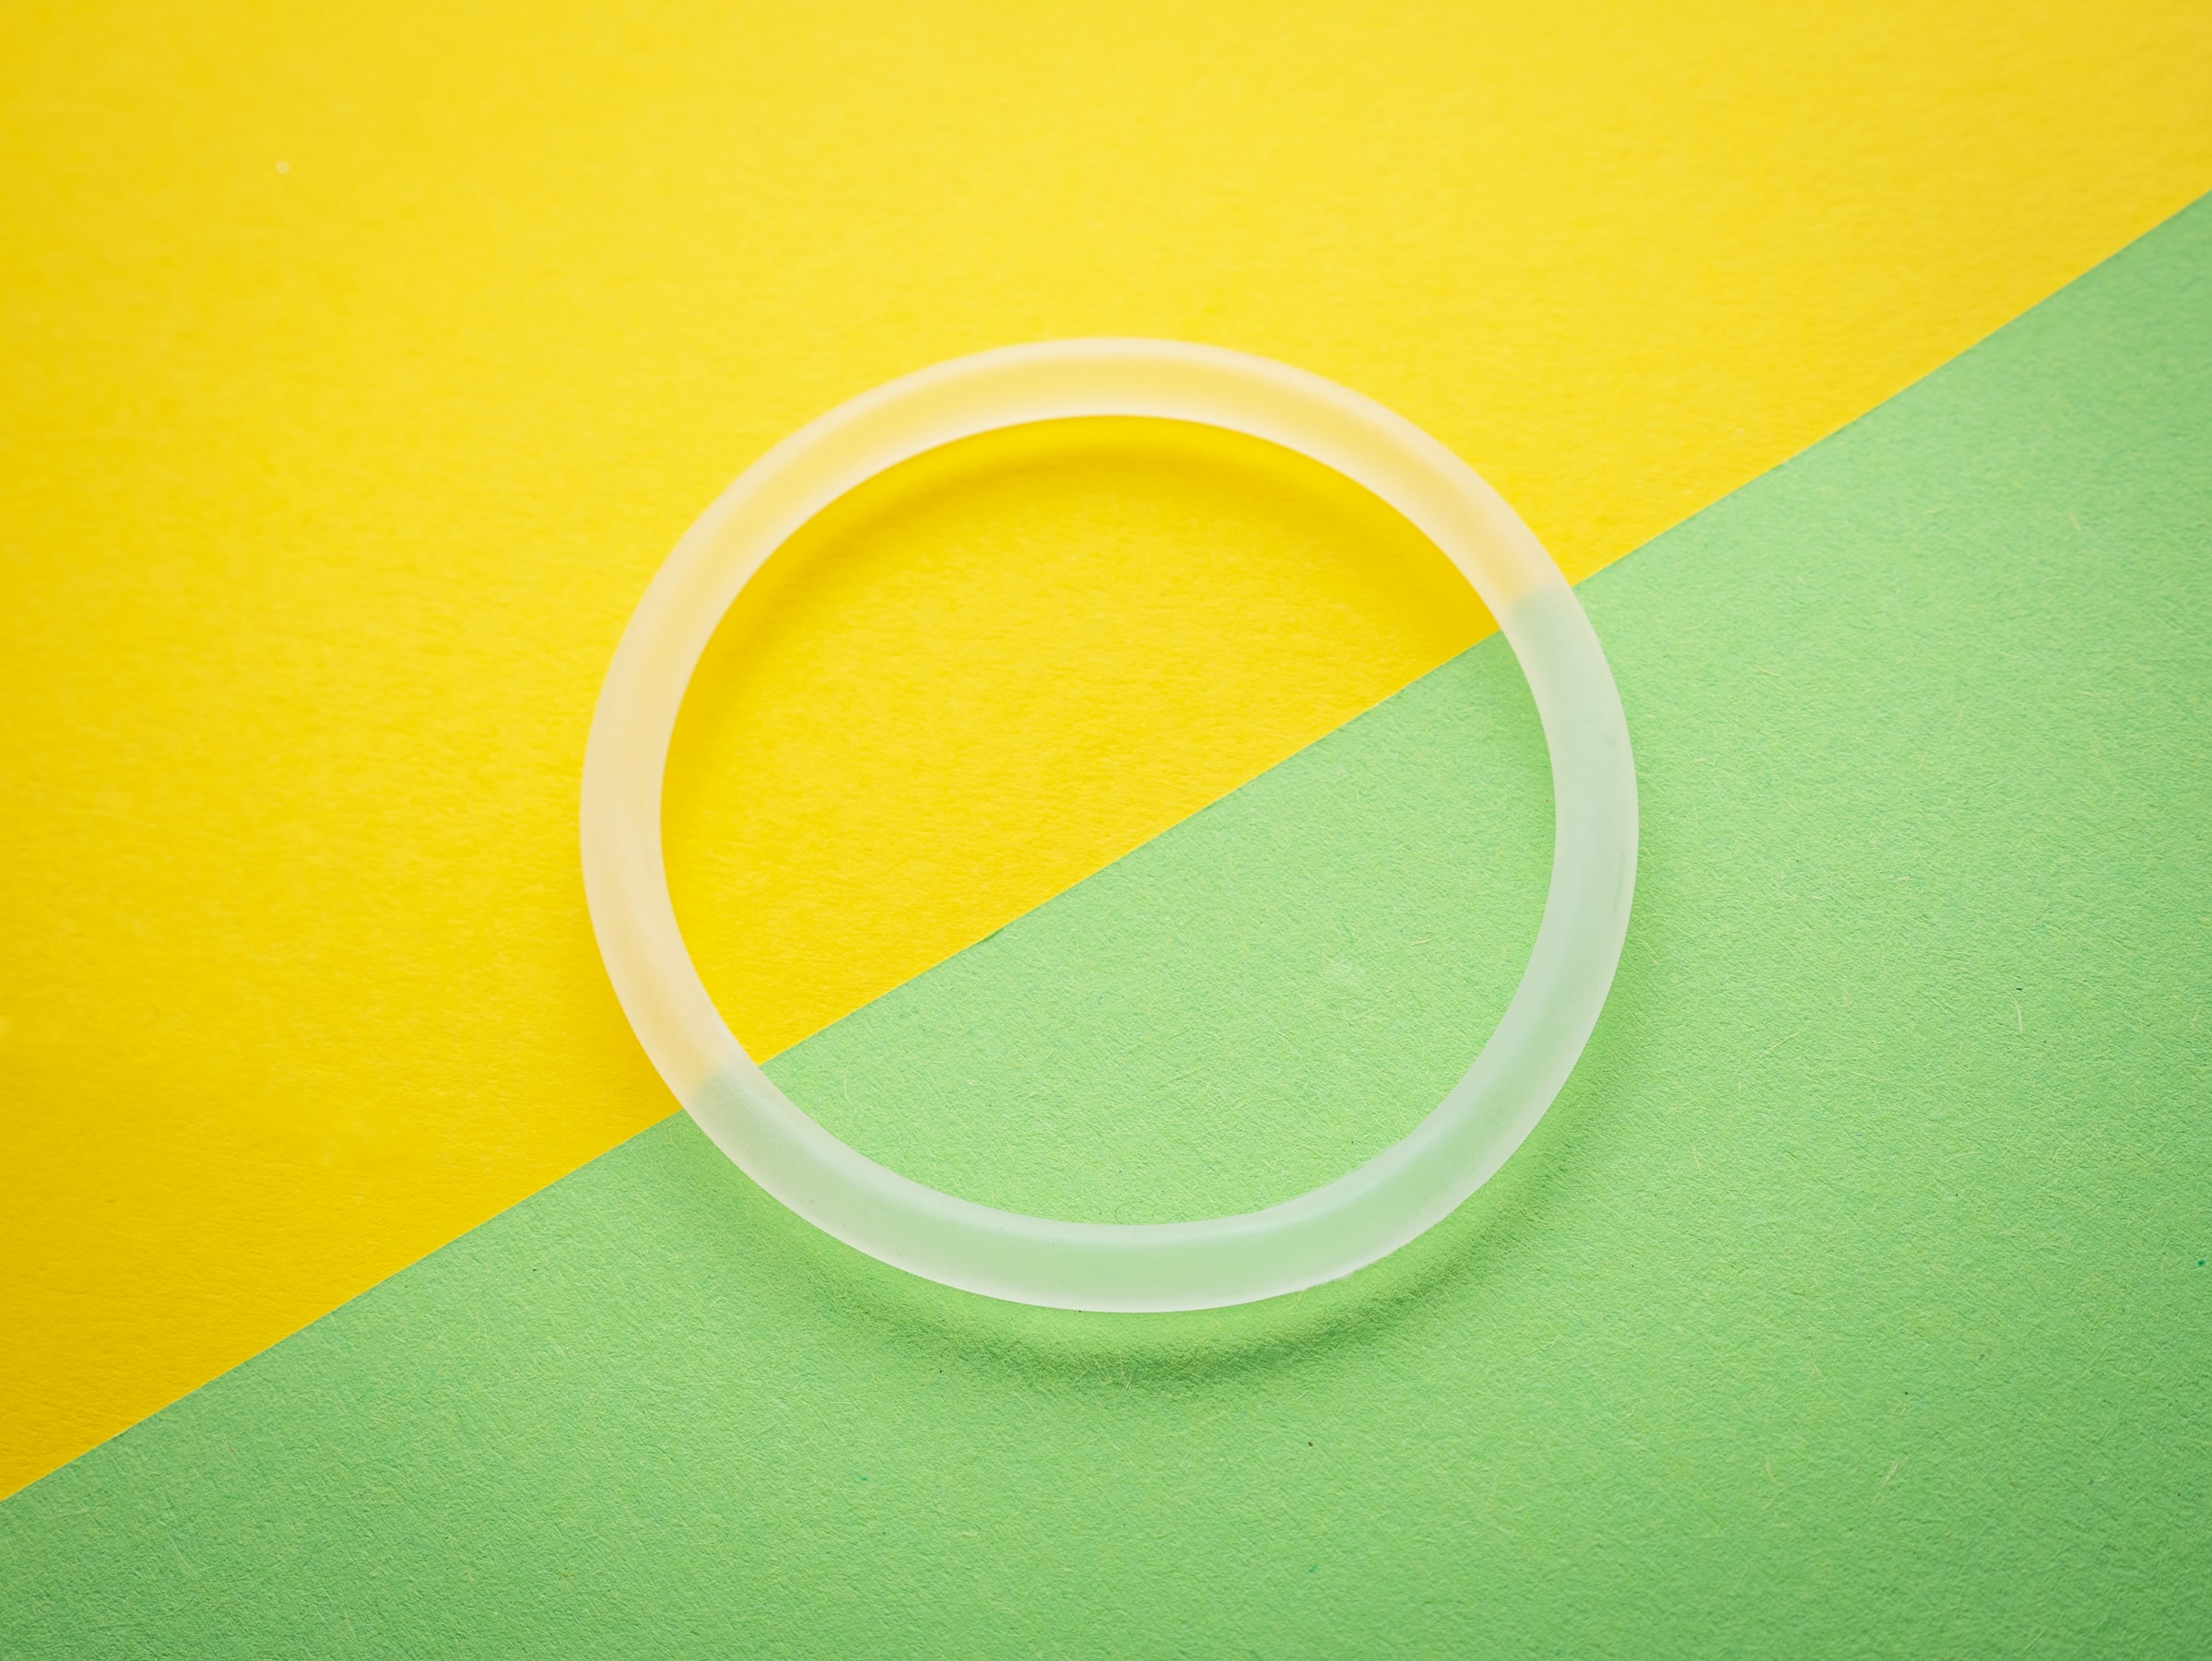 the ring birth control on a yellow and green background